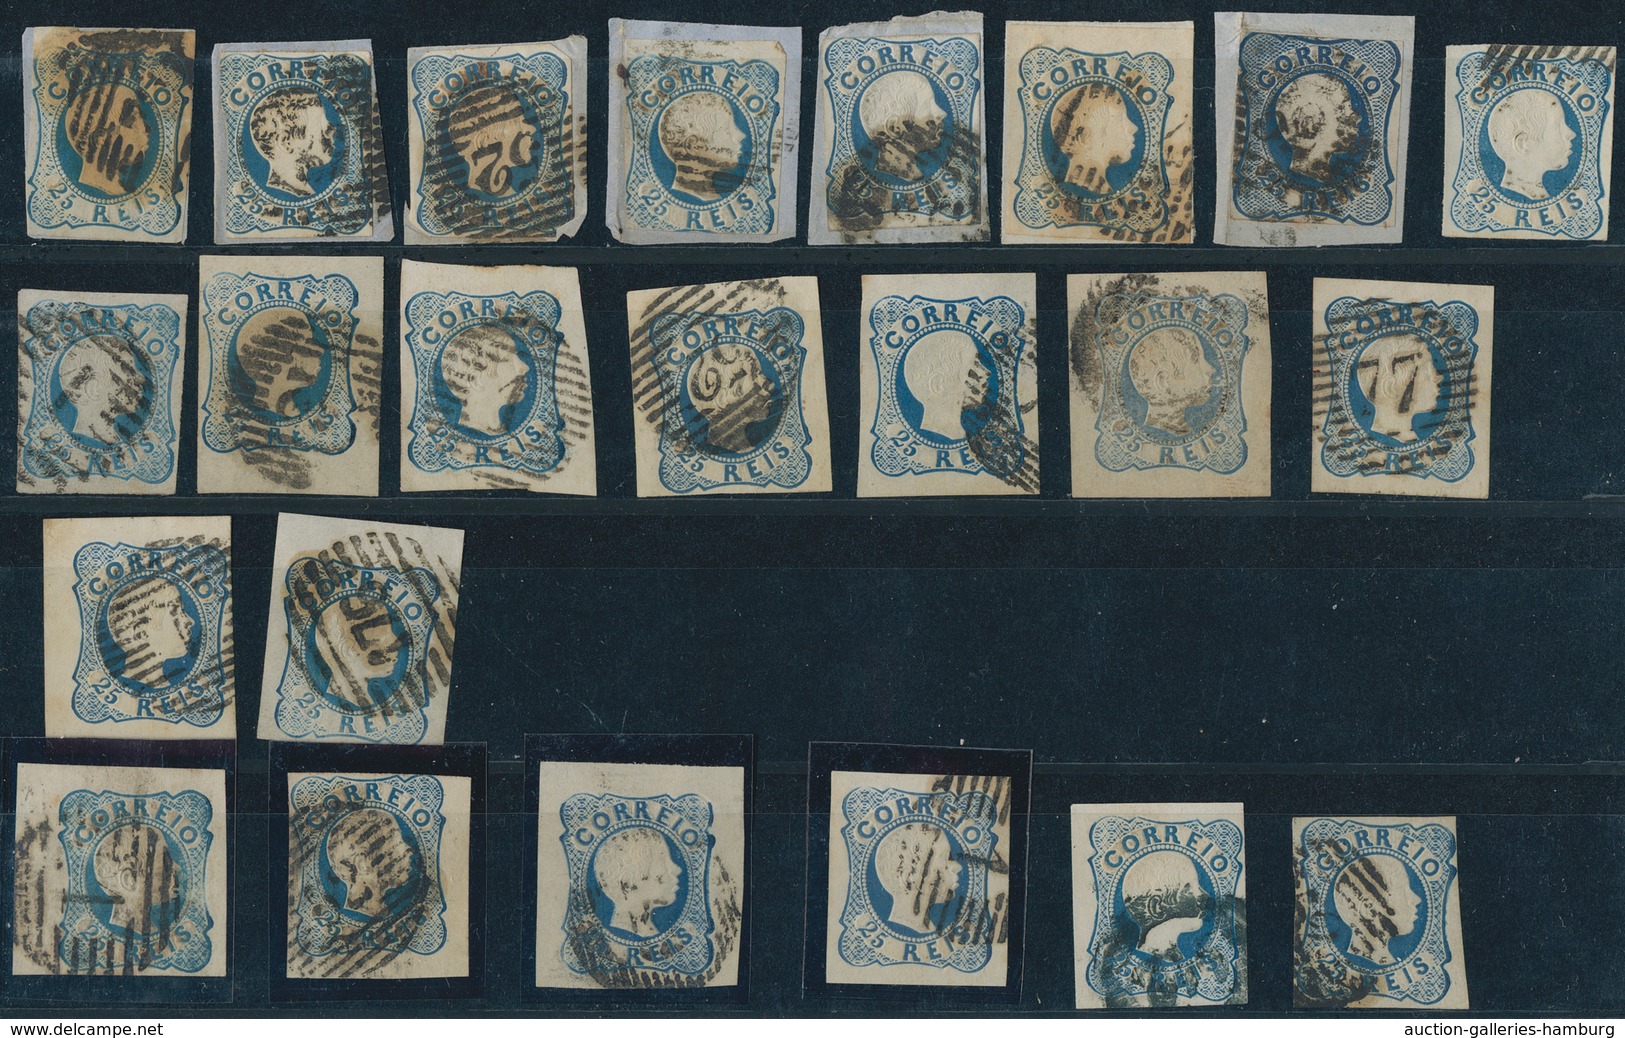 Portugal: 1856, Pedro 25 r. blue, double lines, ca. 290 used copies, often with nice margins, colour